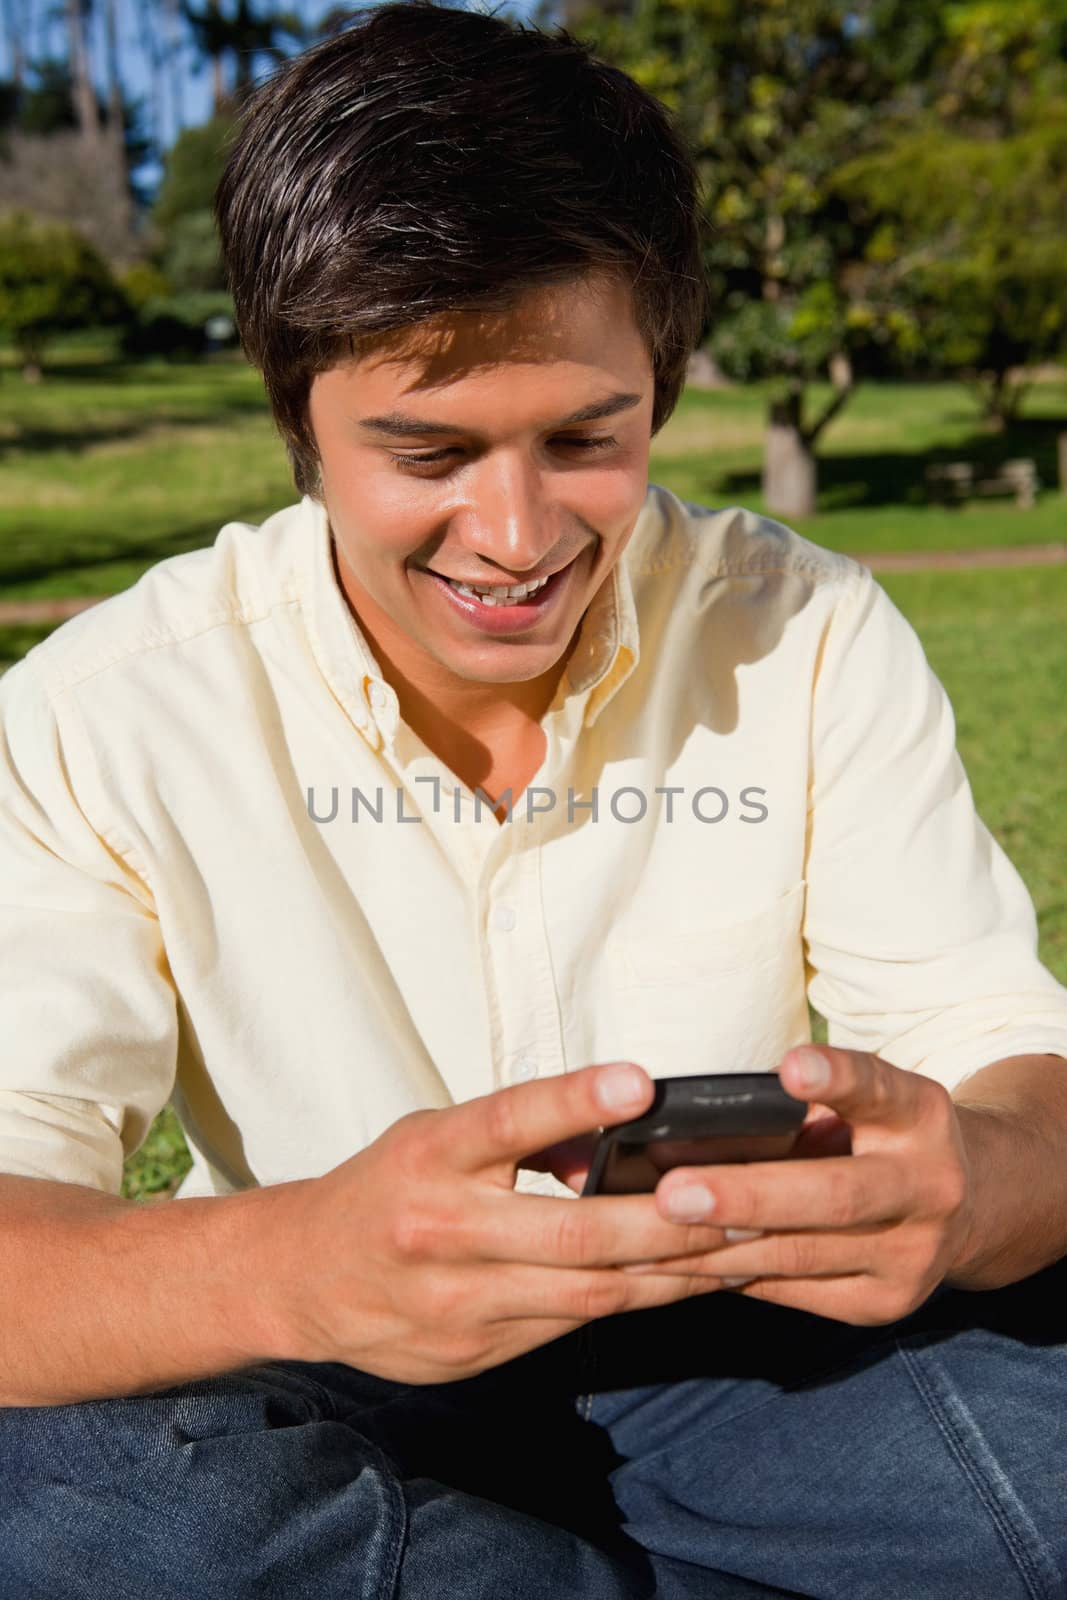 Man smiling as the uses a phone while he is sitting down on the grass